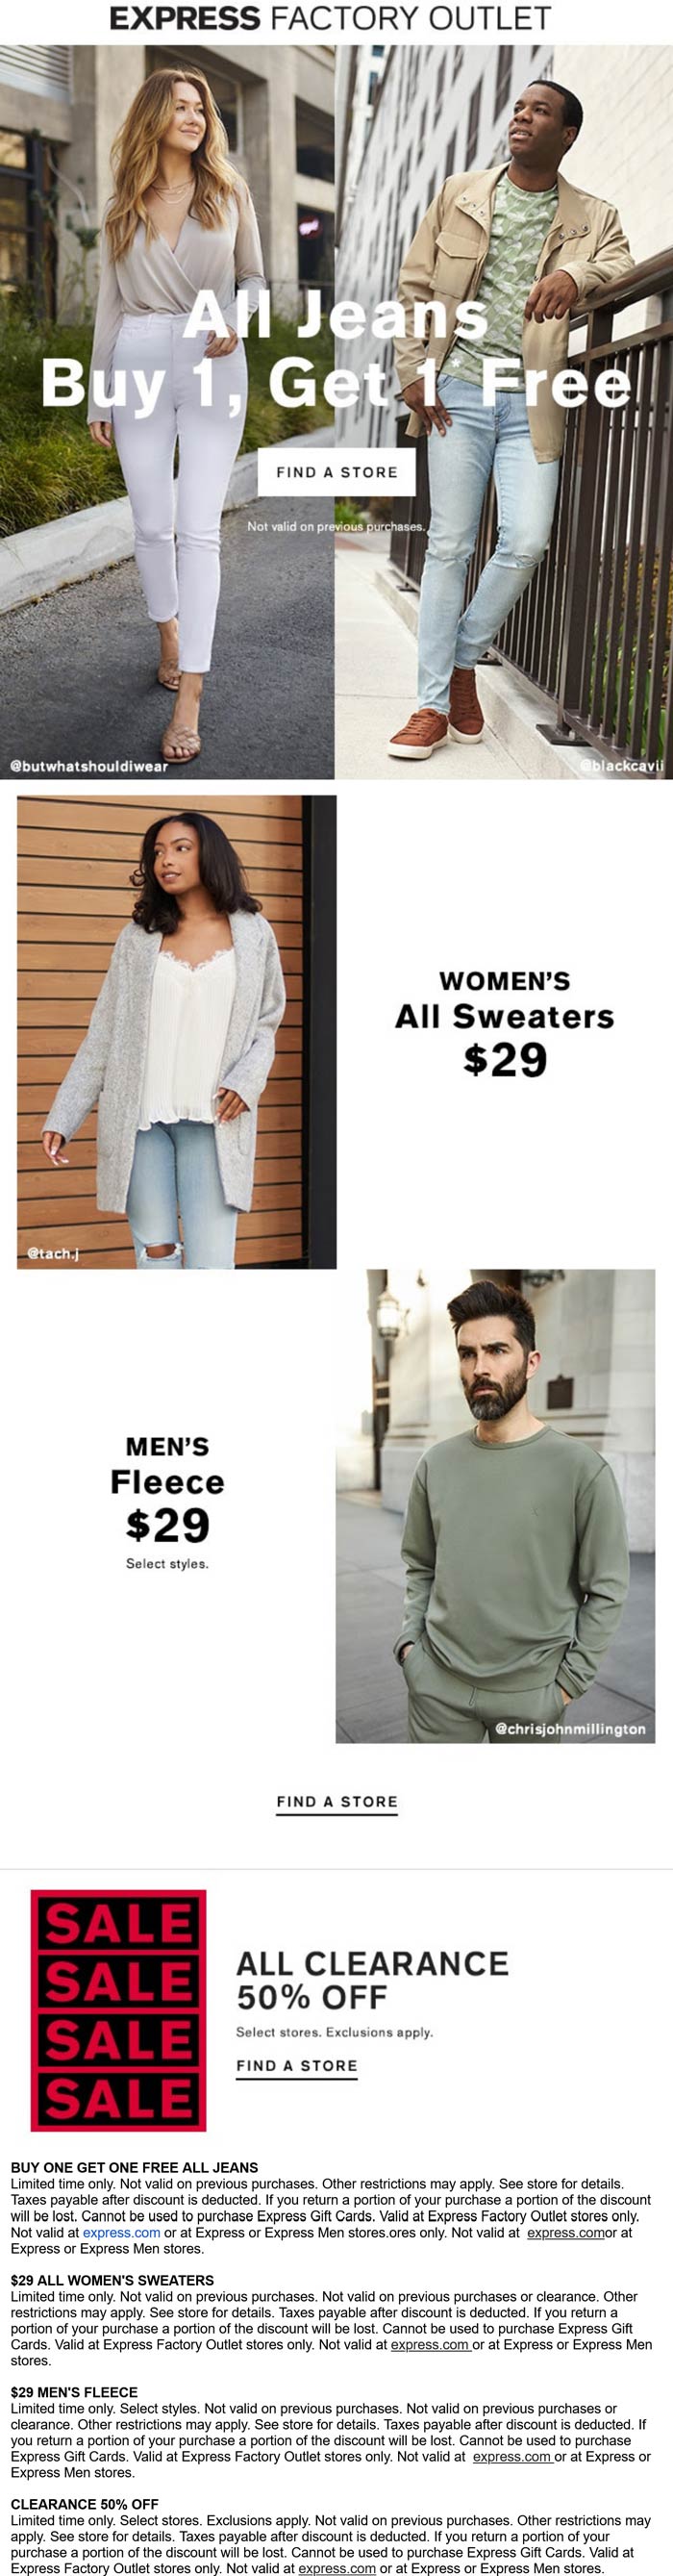 Express Factory Outlet stores Coupon  Second pair jeans free at Express Factory Outlet #expressfactoryoutlet 